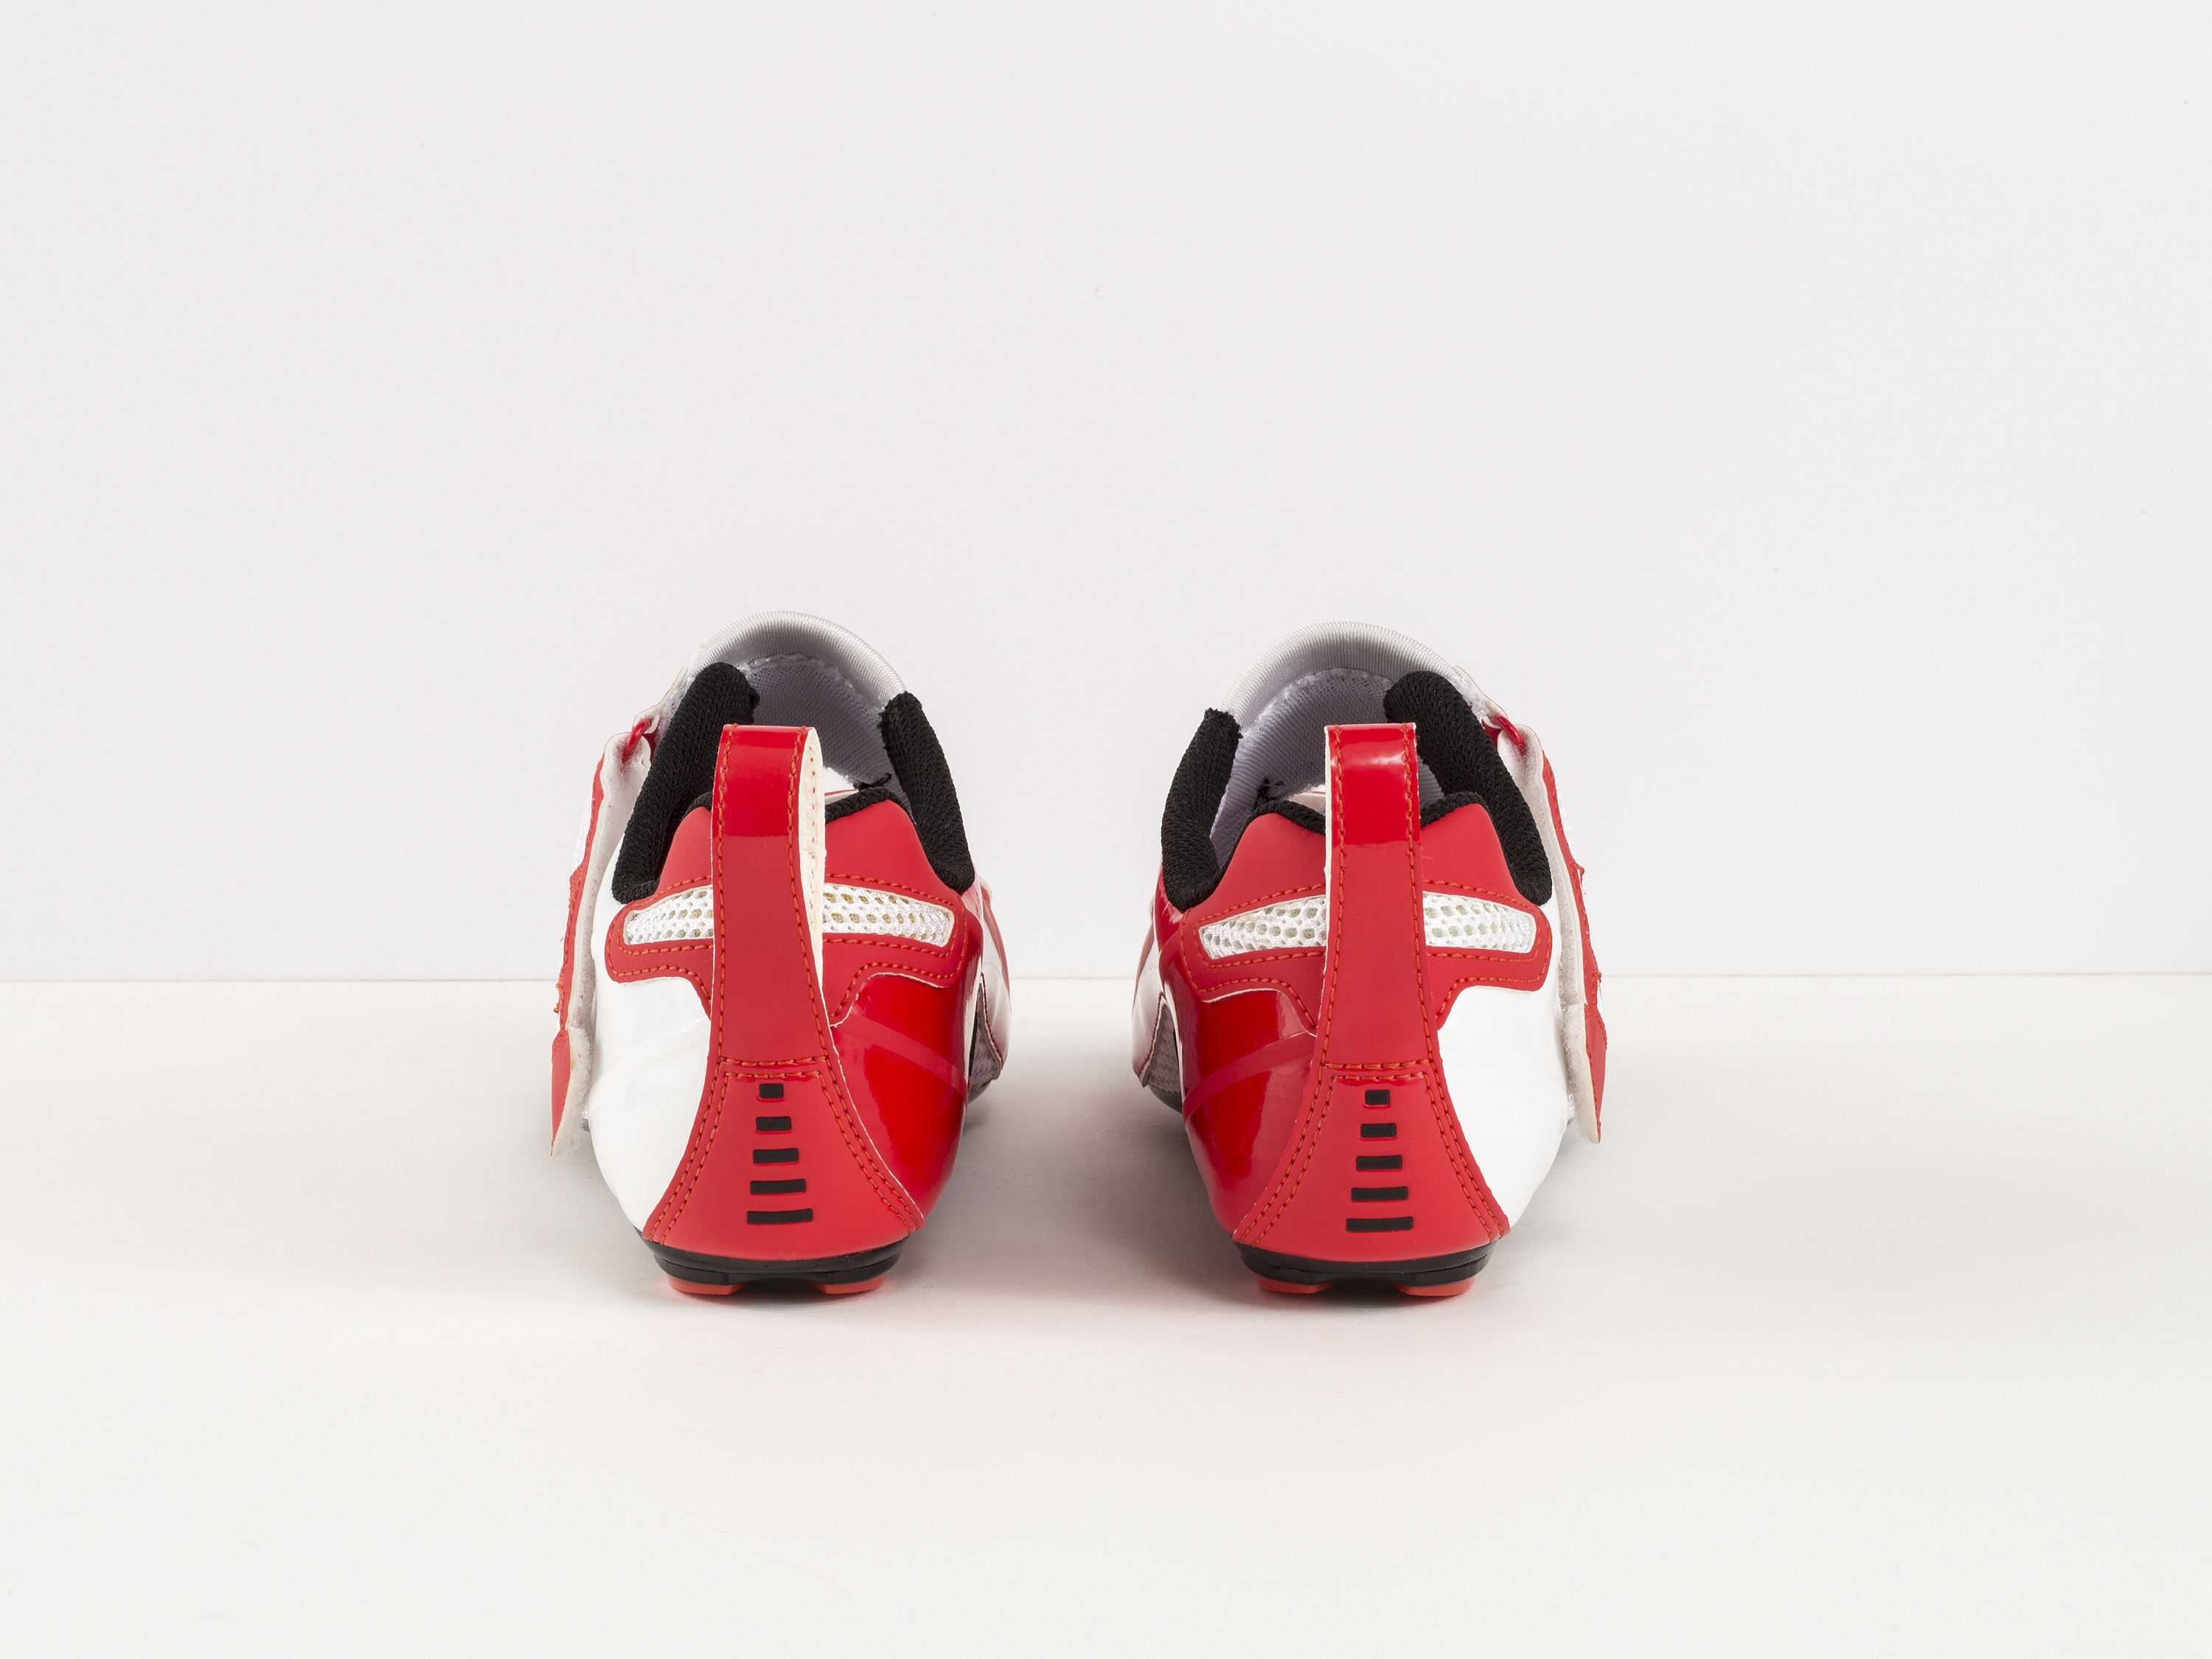 bontrager cycling shoes canada